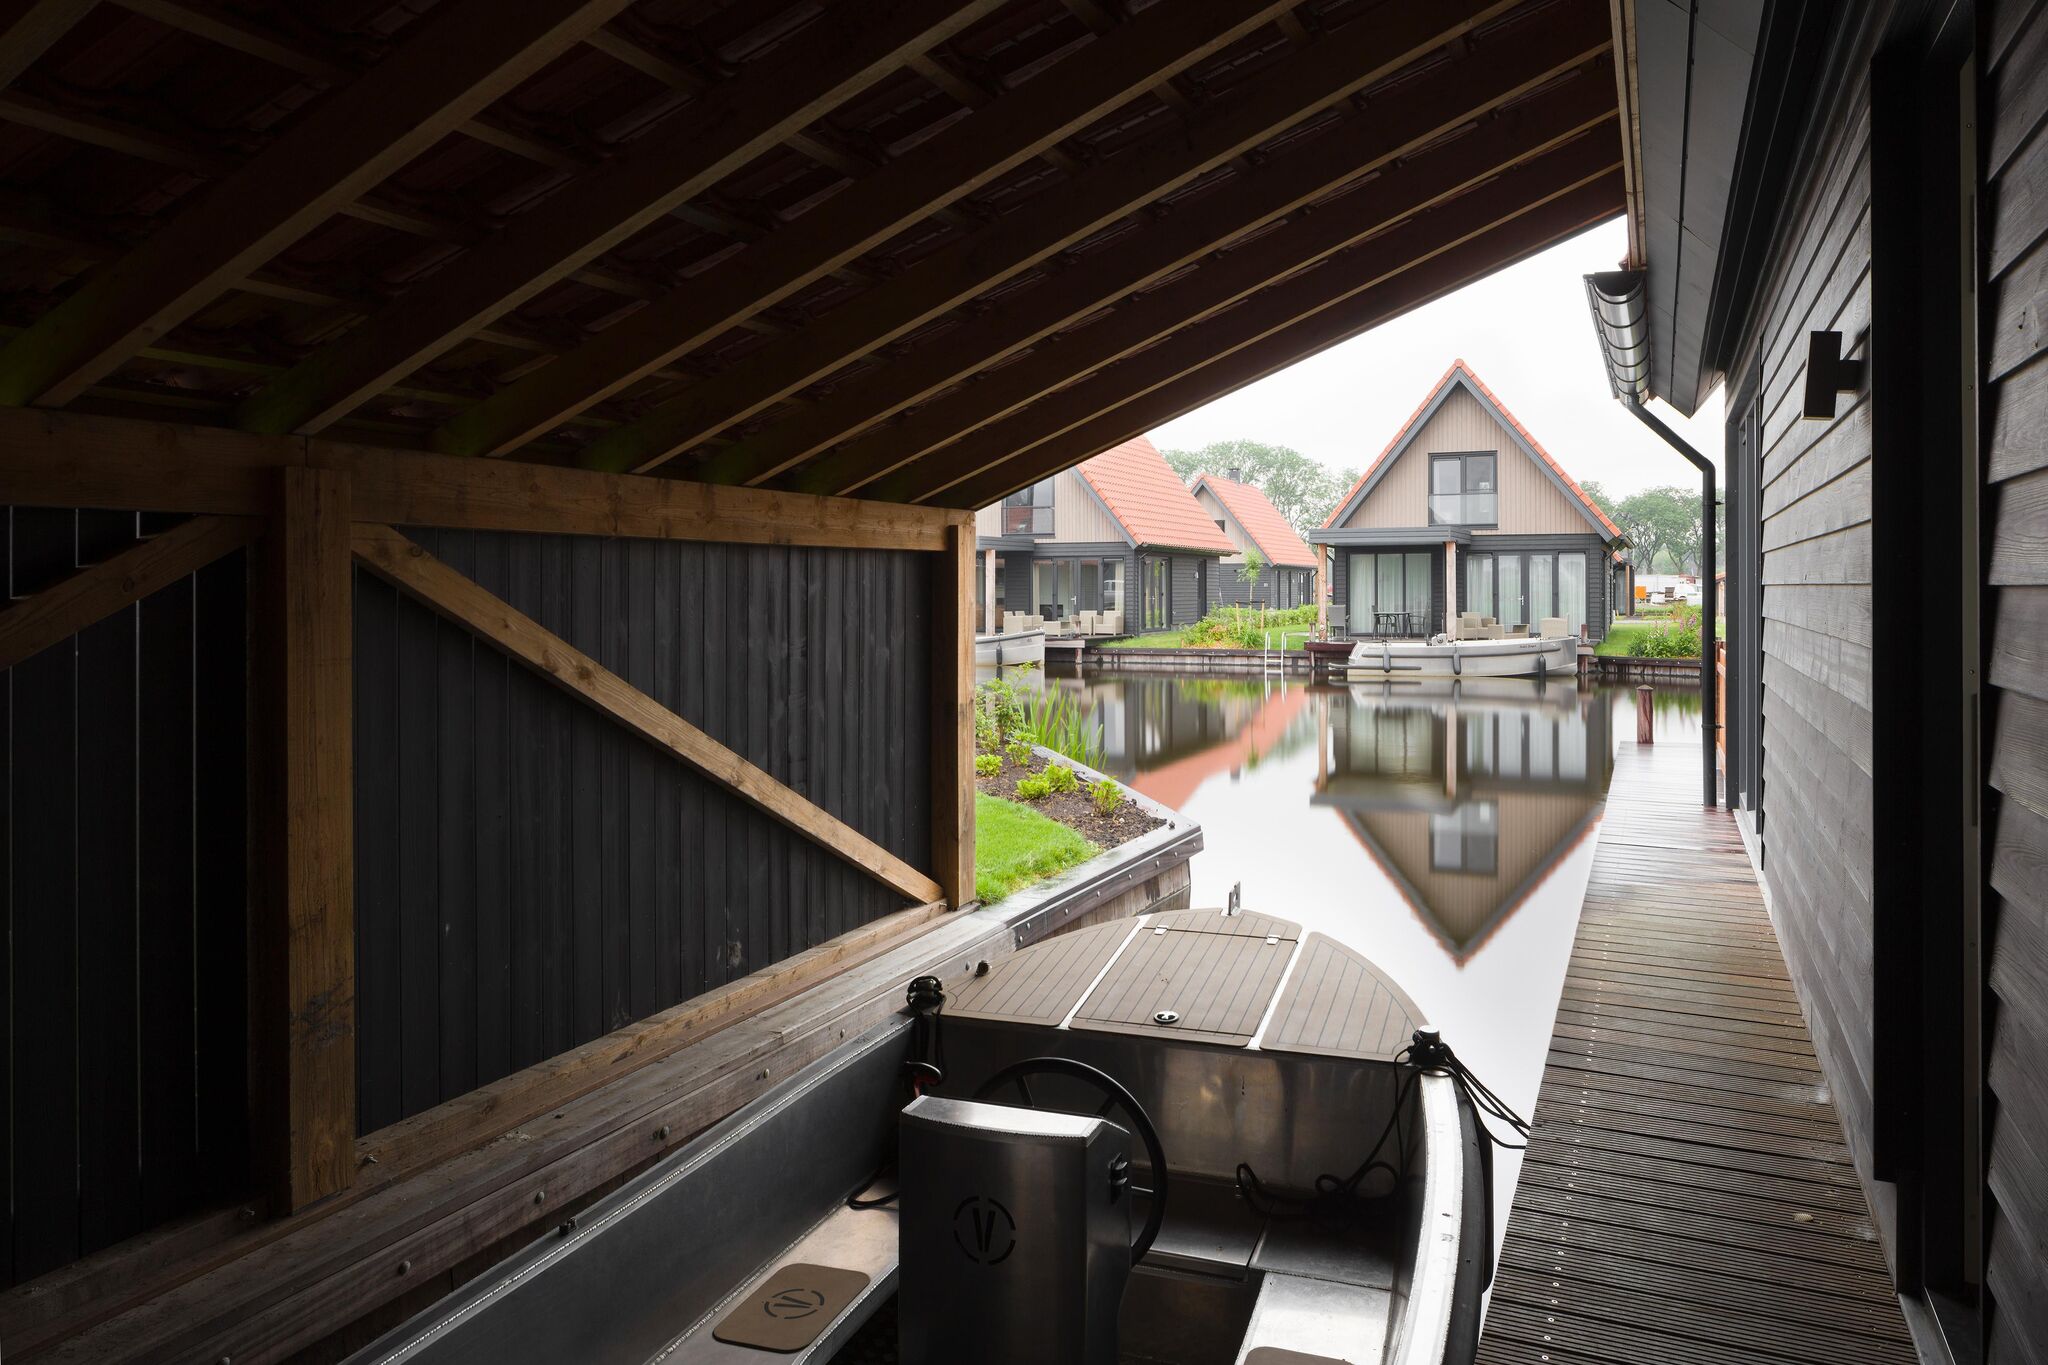 Luxious water villa with 3 bathrooms, at the Frisian Lakes